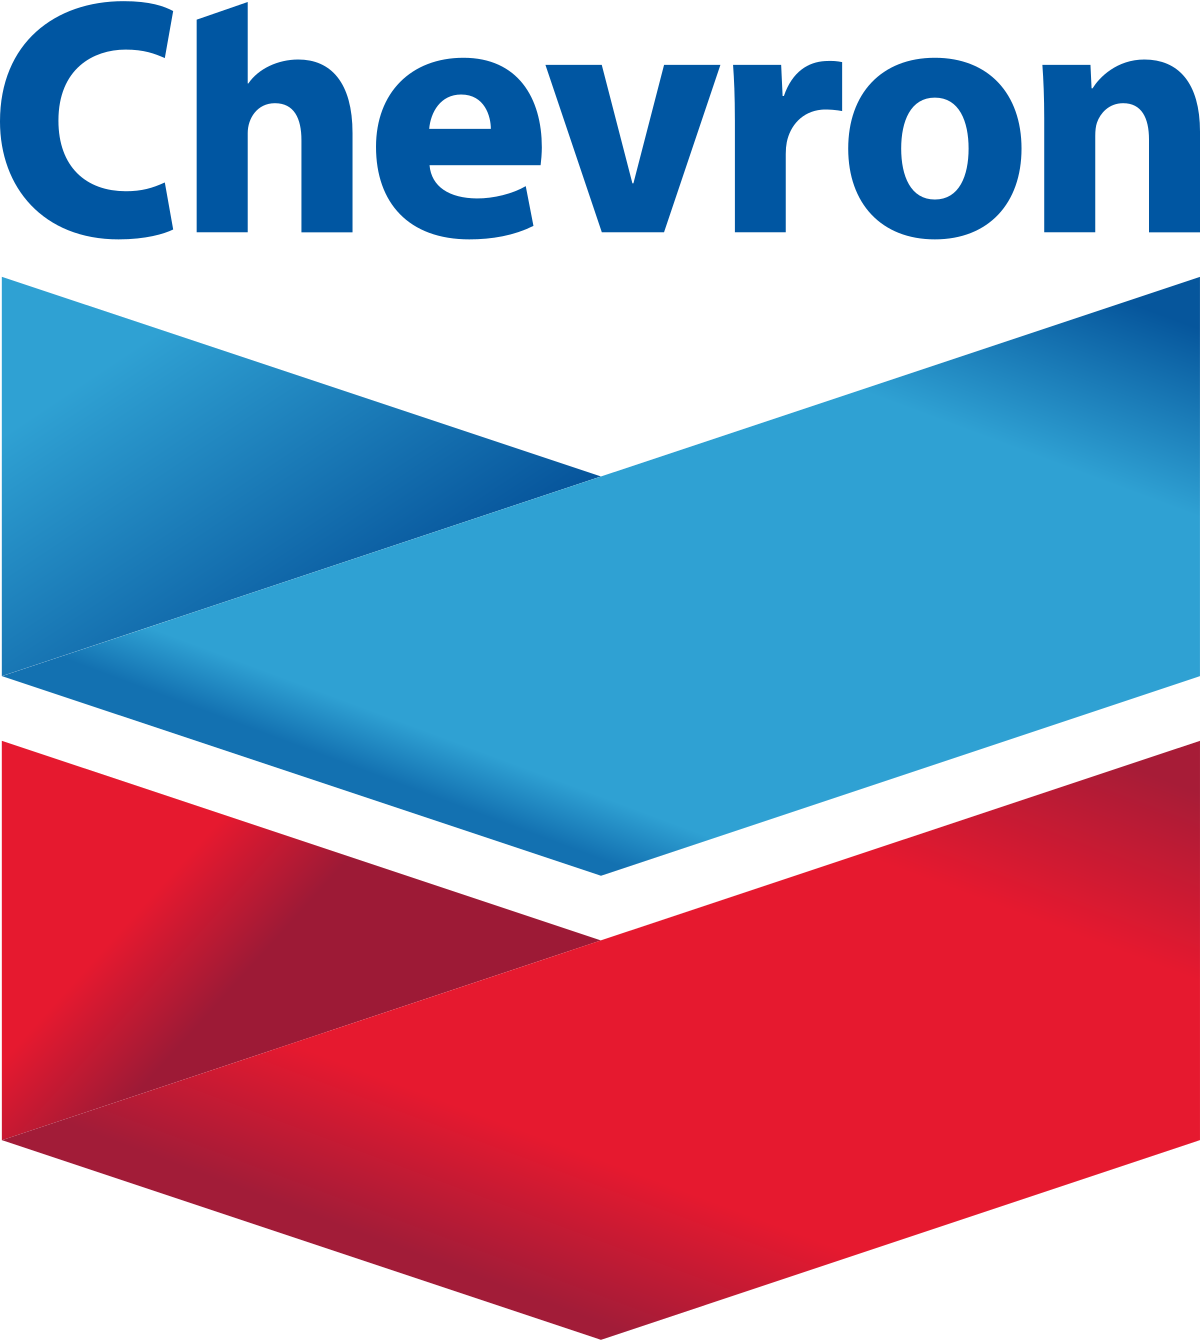 Chevron, Total to exit Myanmar over human rights abuses